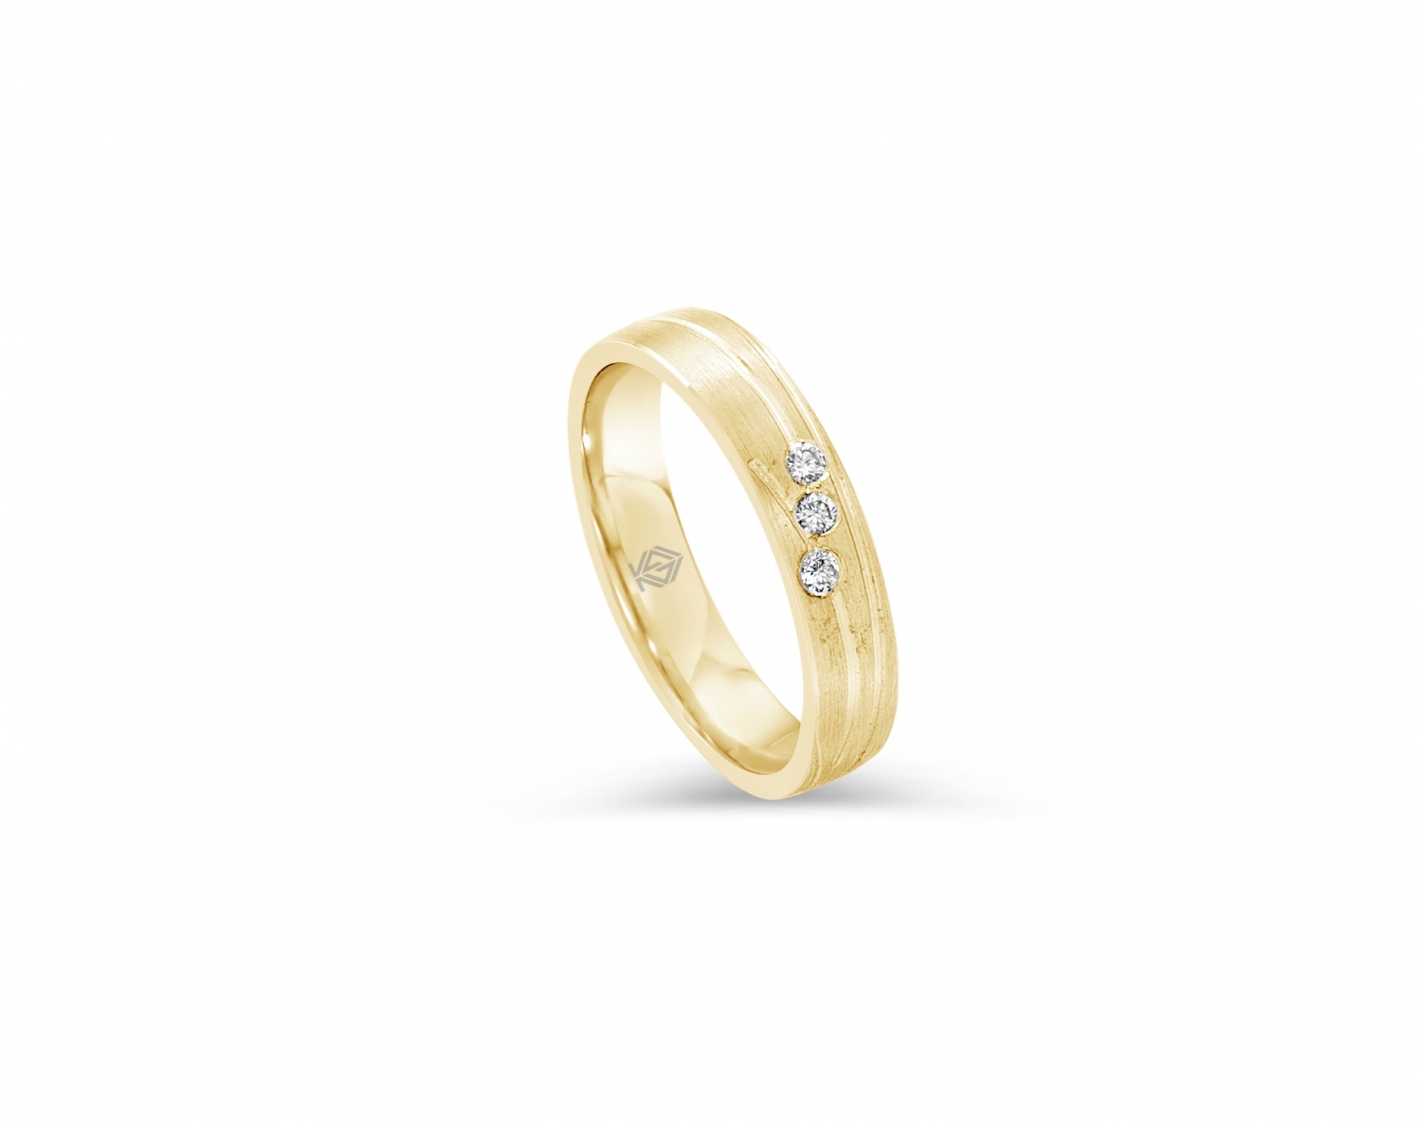 18k yellow gold 4mm matte wedding ring set with three round diamonds and non-parallel inlays Photos & images